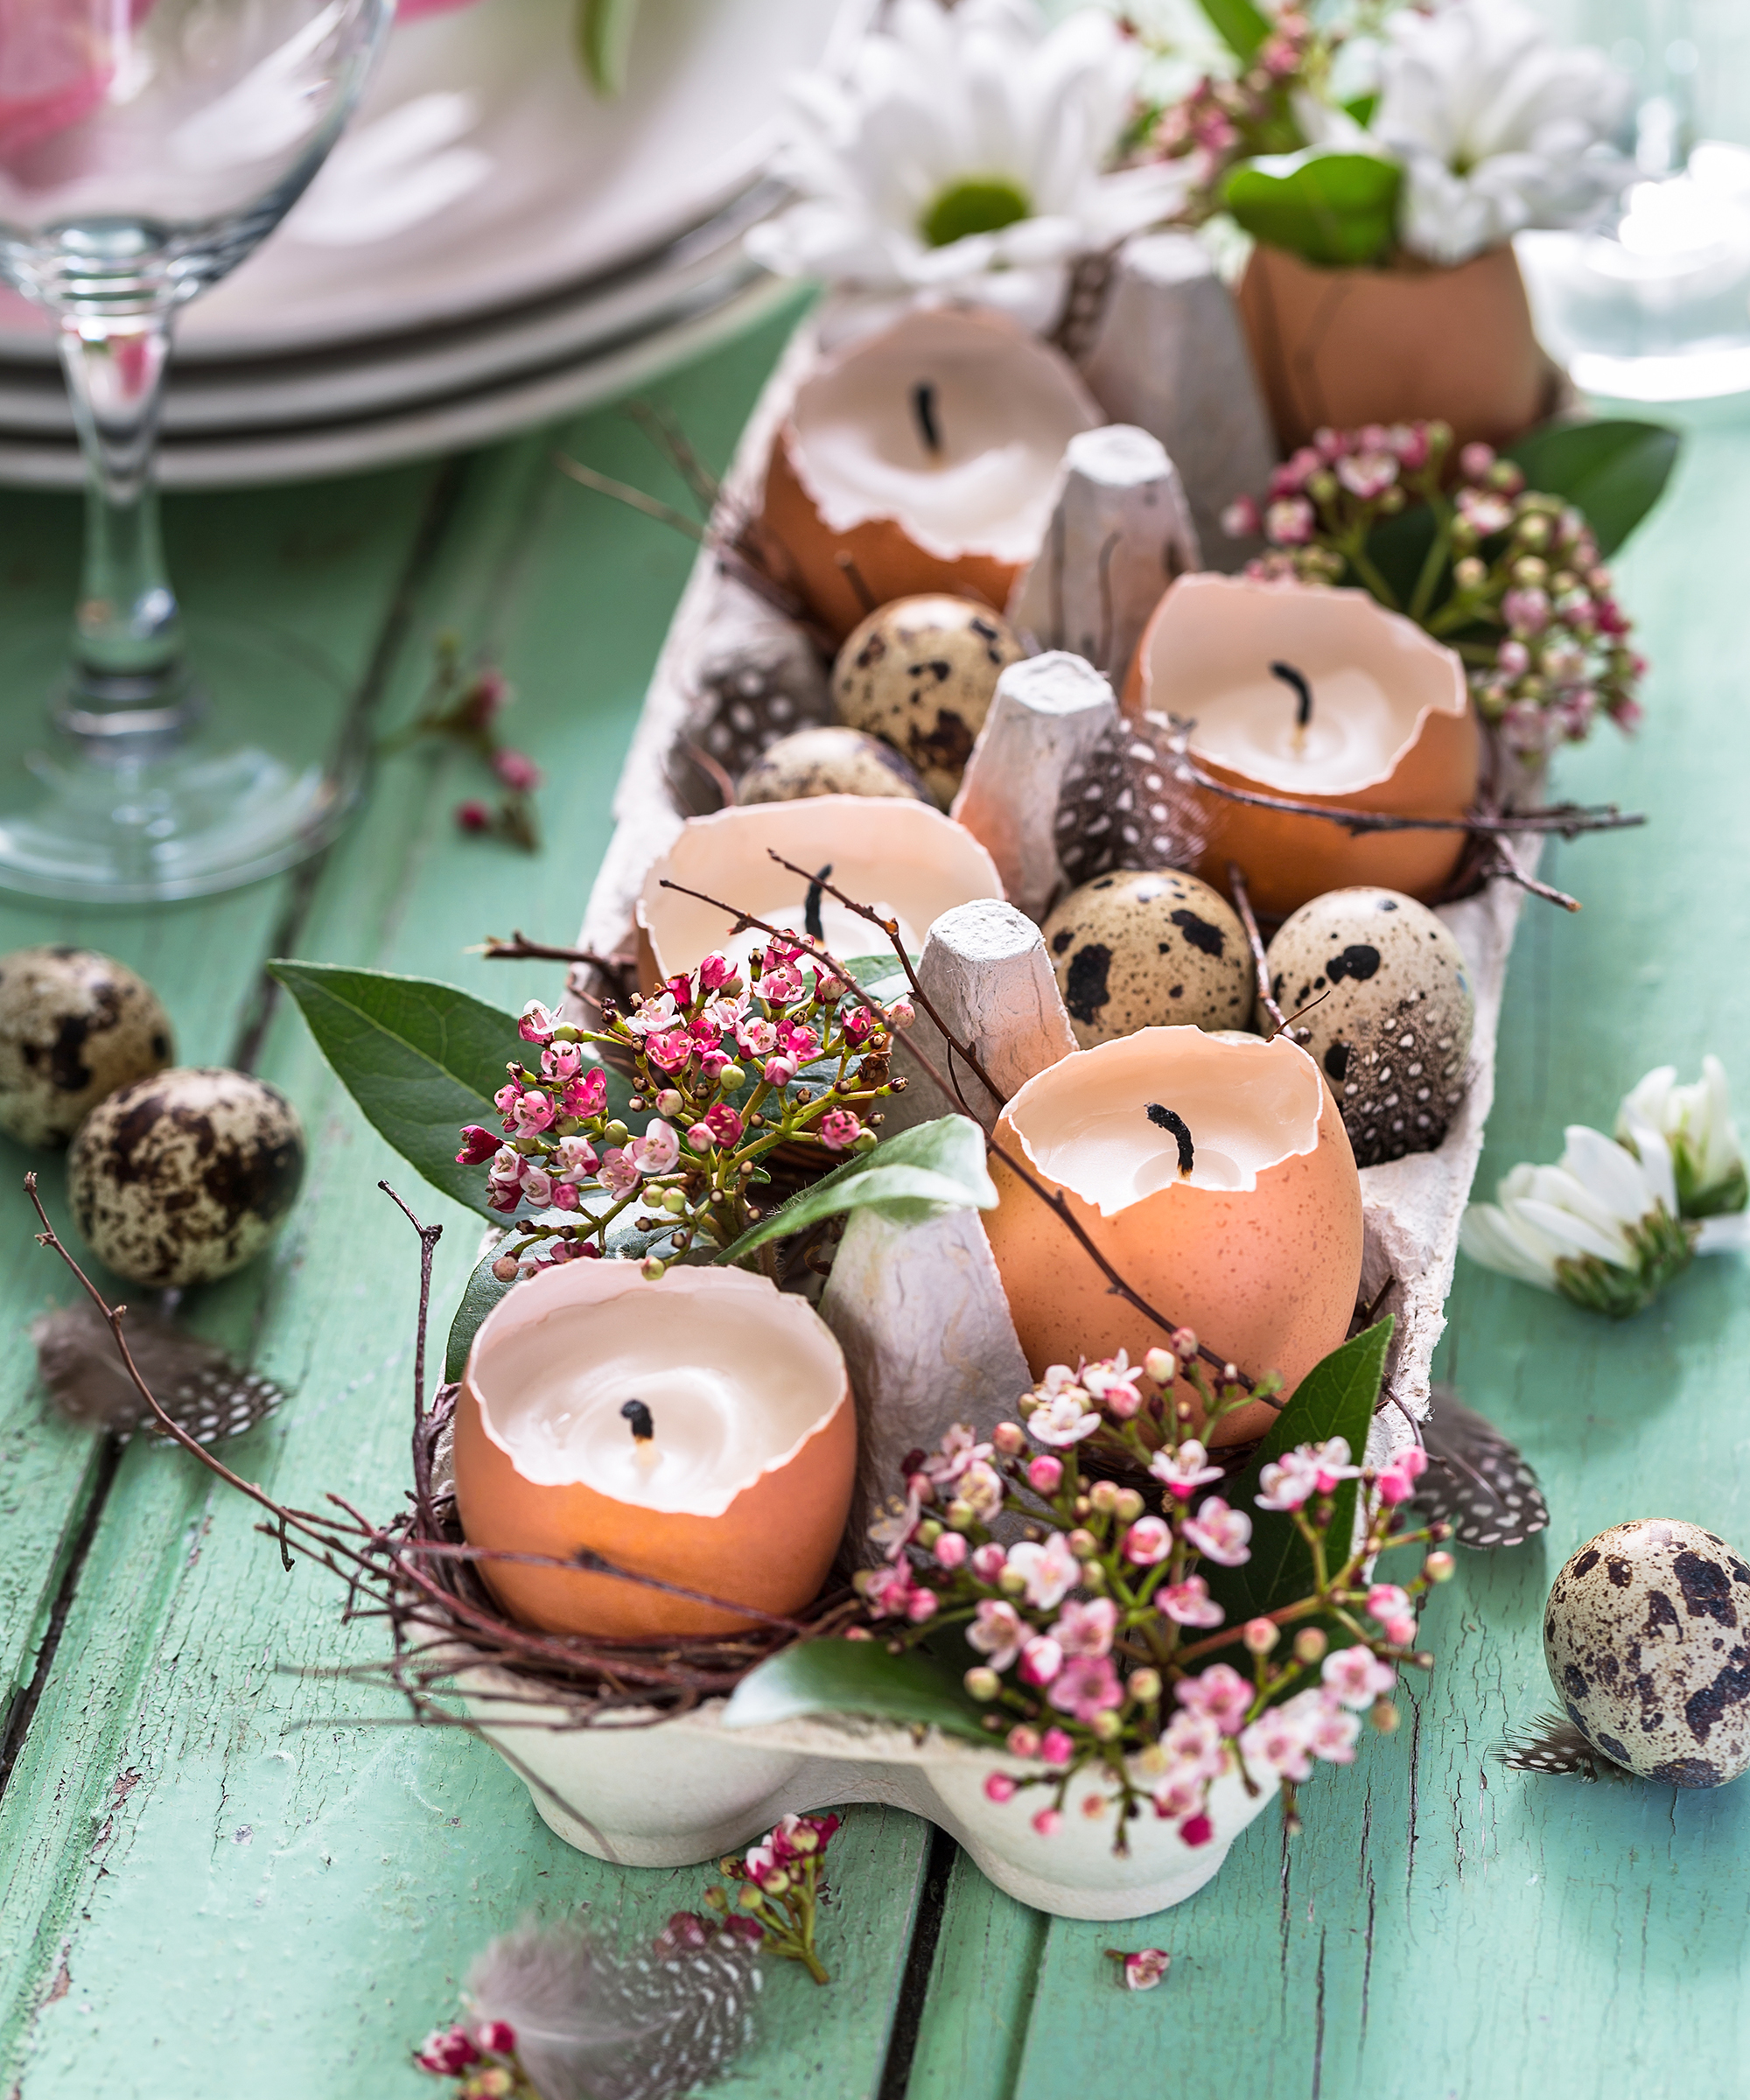 Egg carton filled with egg candles, flowers, and twigs